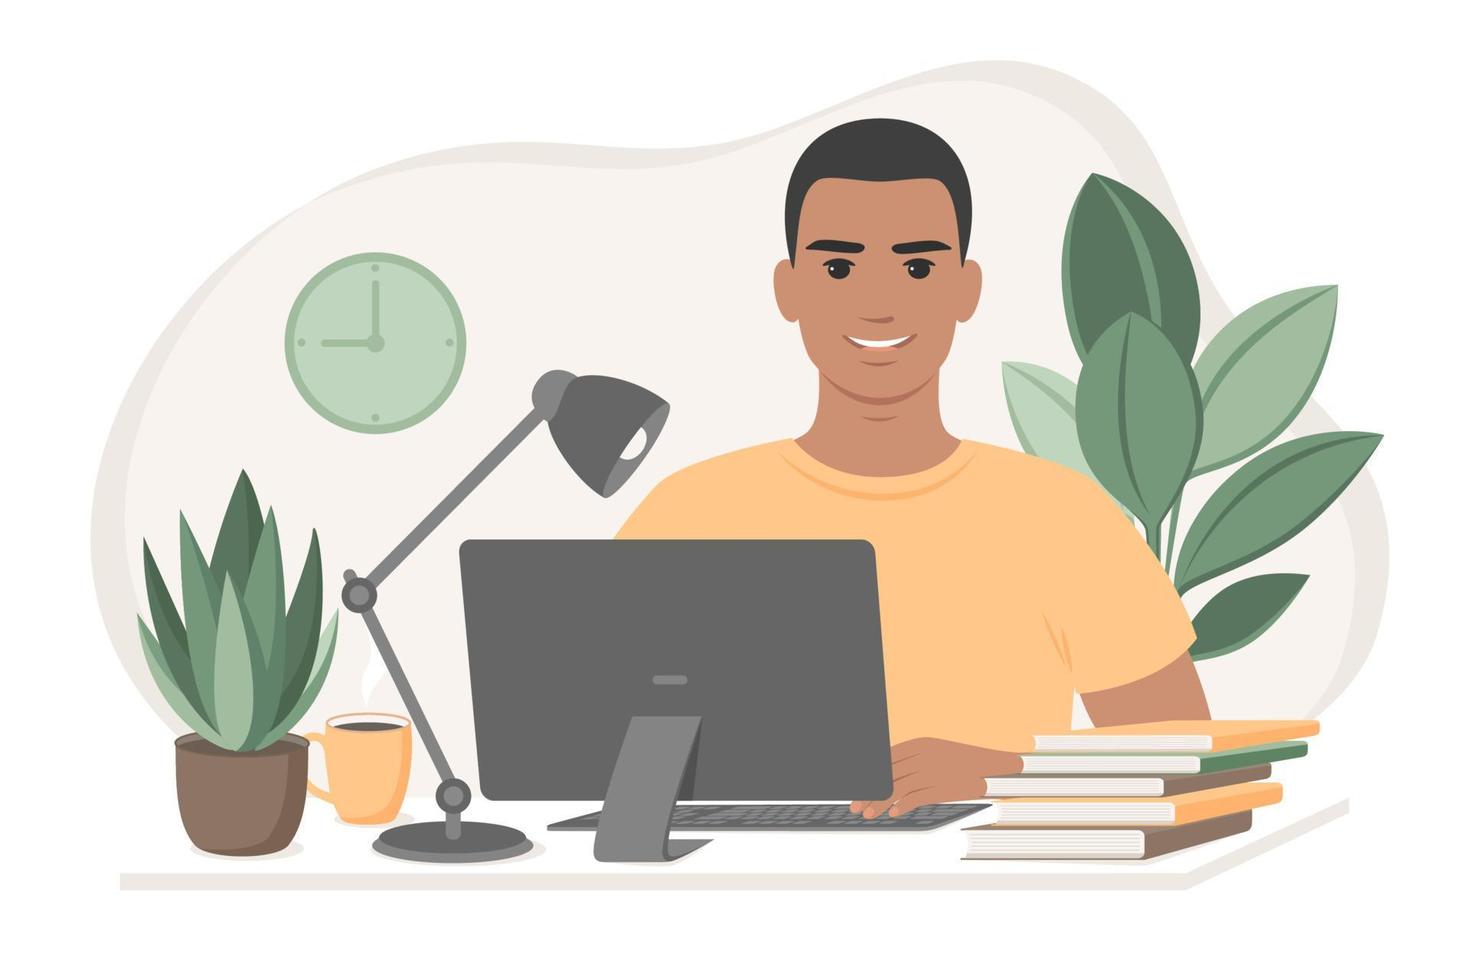 Student with dark skin and hair learns using online courses, freelancer working from home. Freelance,  studying or online education, homeschooling concept. Vector flat style illustration.